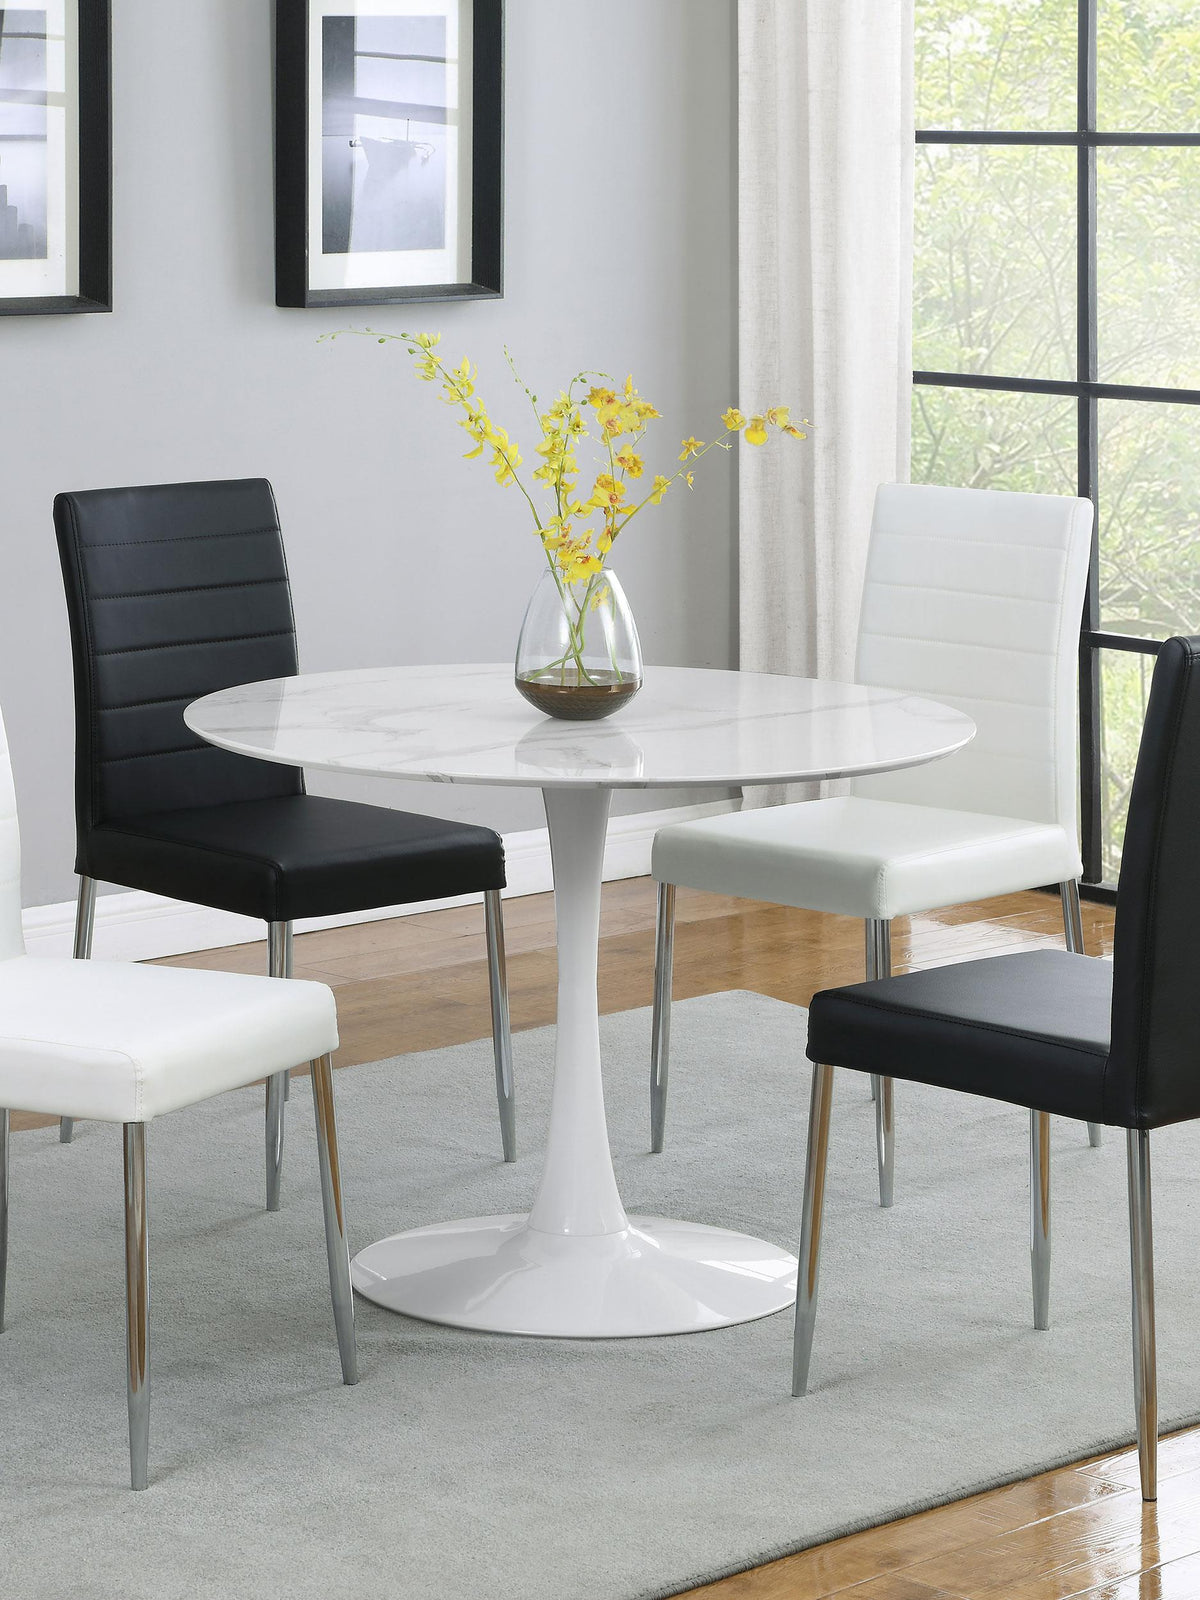 Arkell 40-inch Round Pedestal Dining Table White Arkell 40-inch Round Pedestal Dining Table White Half Price Furniture